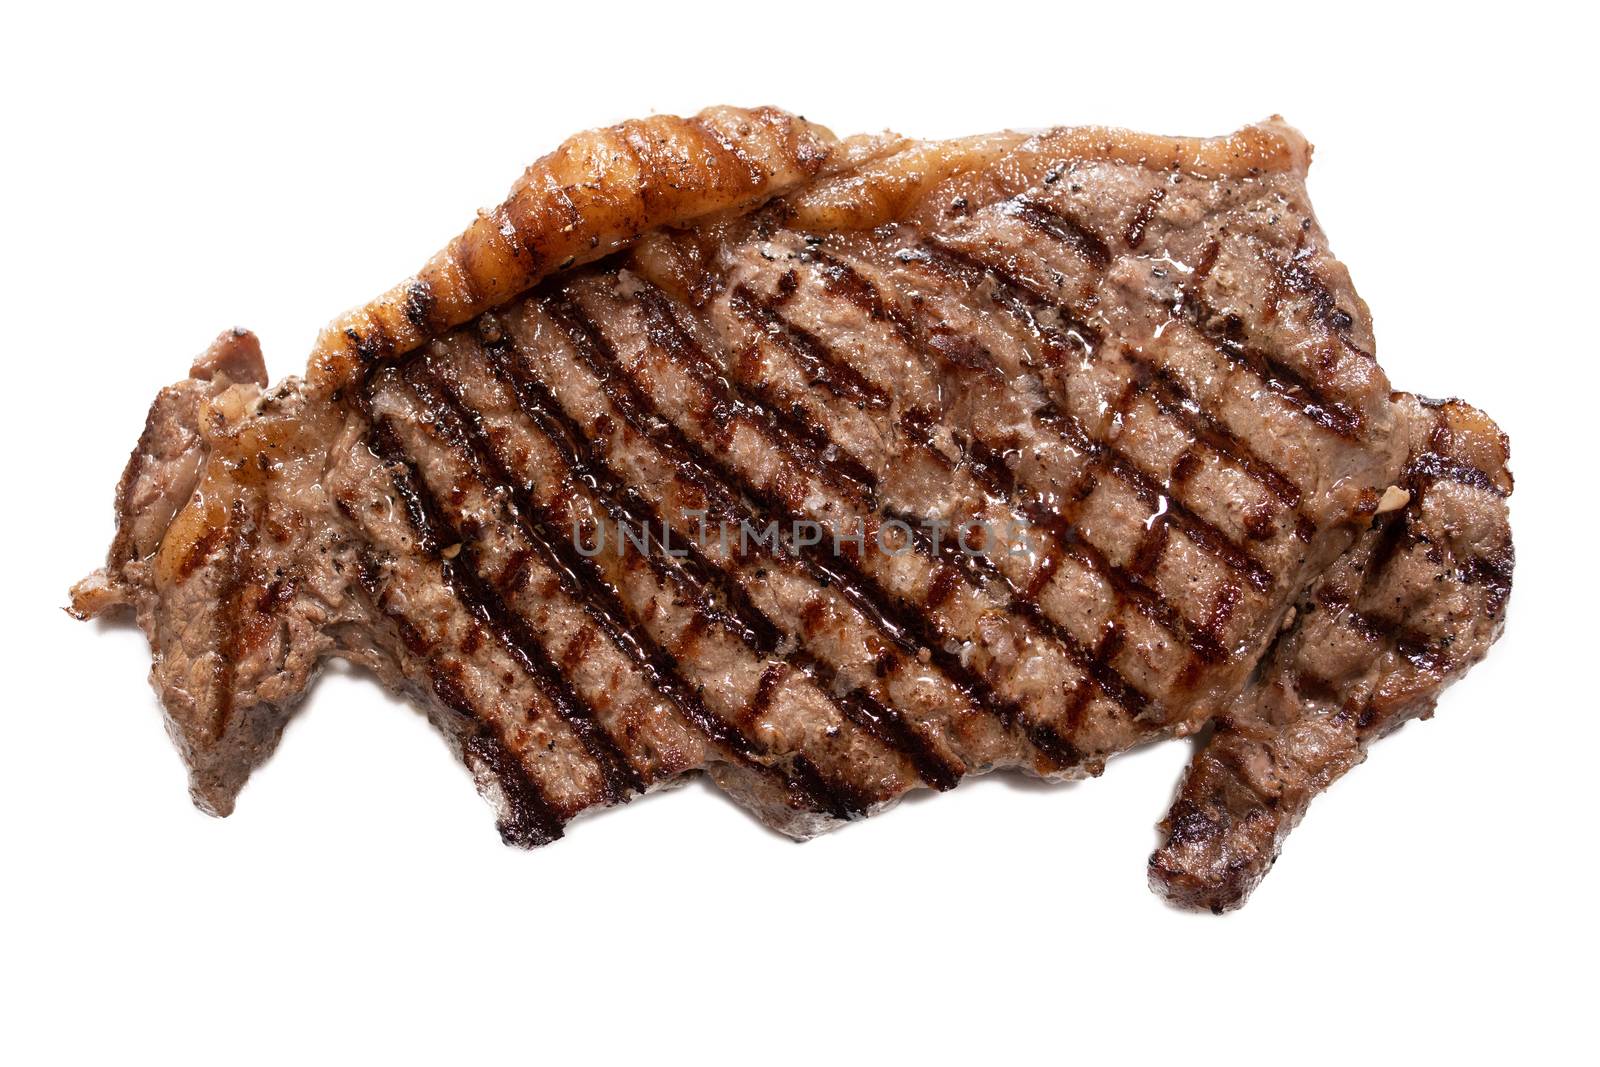 Isolated grilled beef steak on white background by Charnsitr